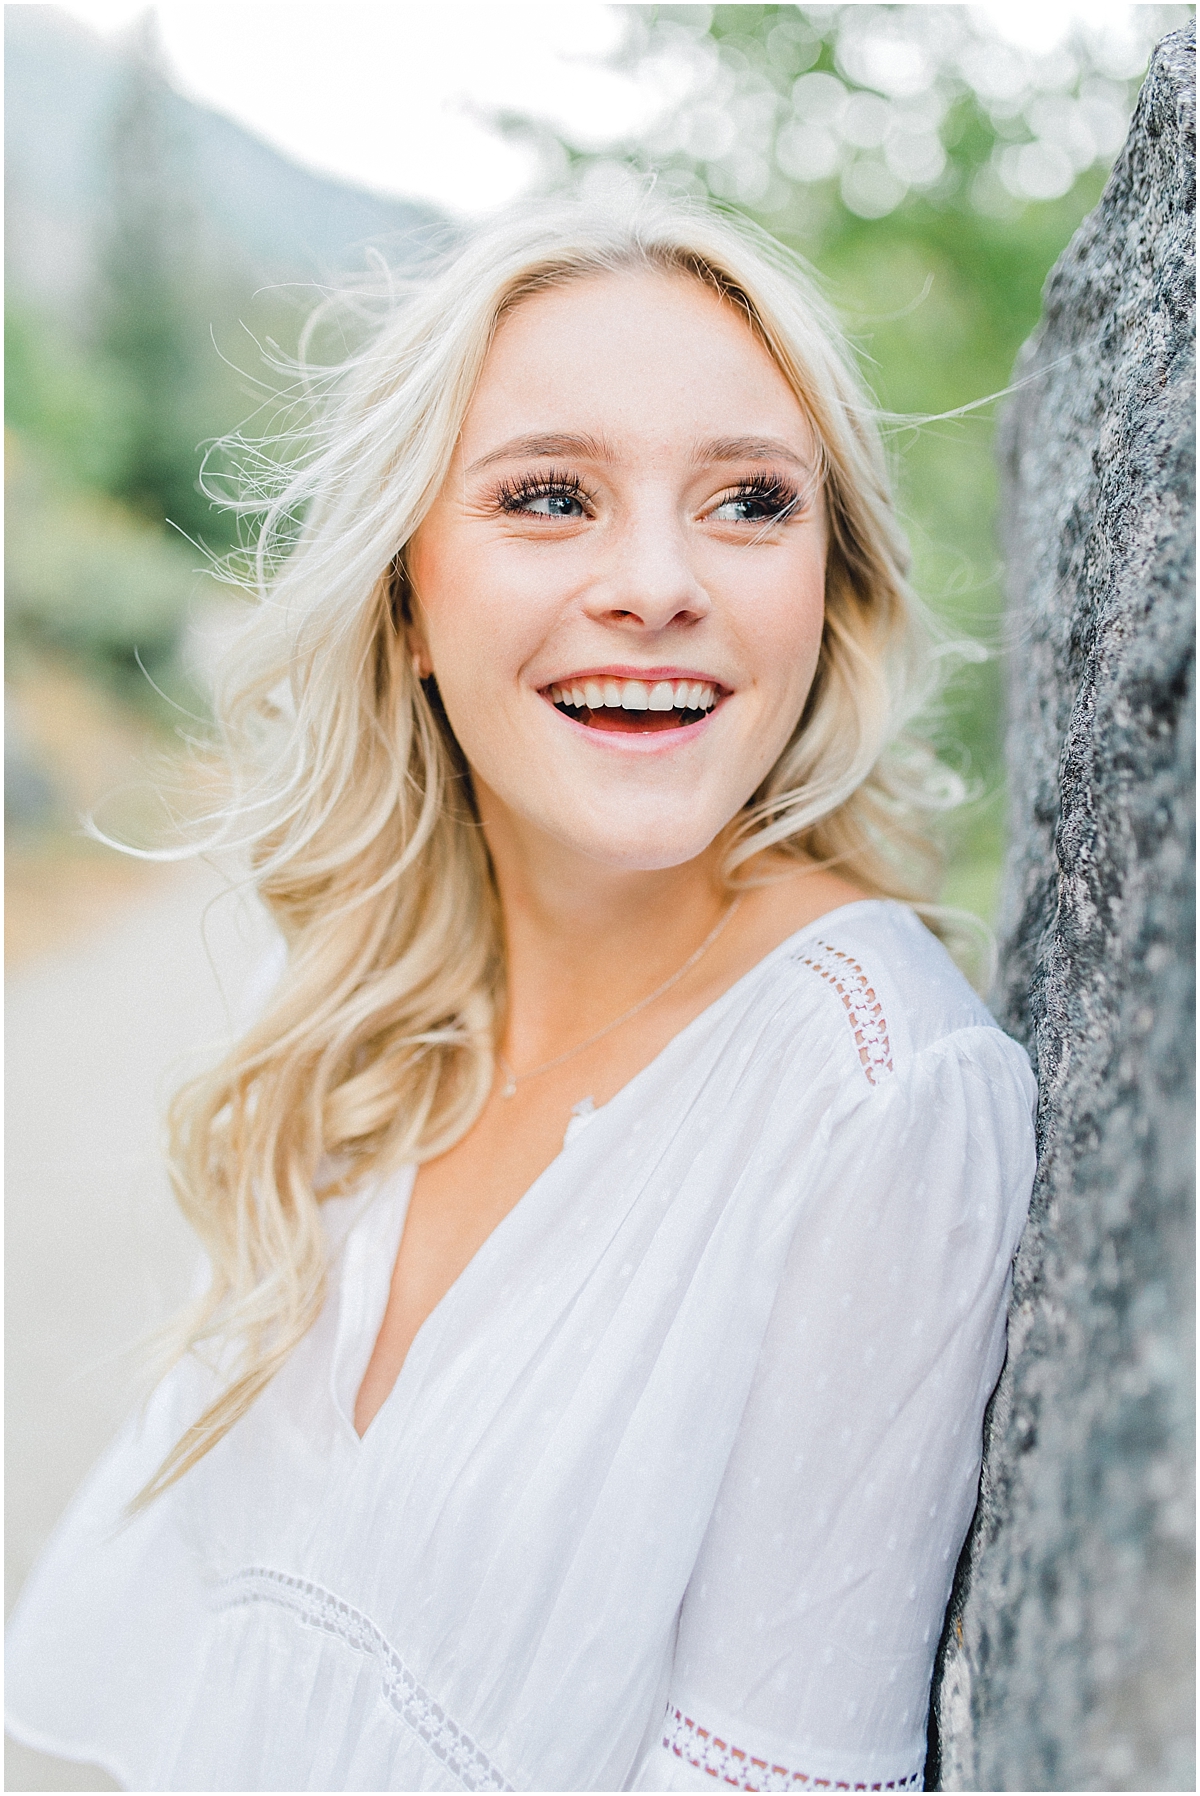 Emma Rose Company | Pacific Northwest Senior Portrait Photographer | Light and Airy Styled Senior Portraits | What to Wear to Senior Pictures | Kindred Presets | Seattle, Wenatchee and Portland Wedding and Portrait Photographer | Emma Rose20.jpg